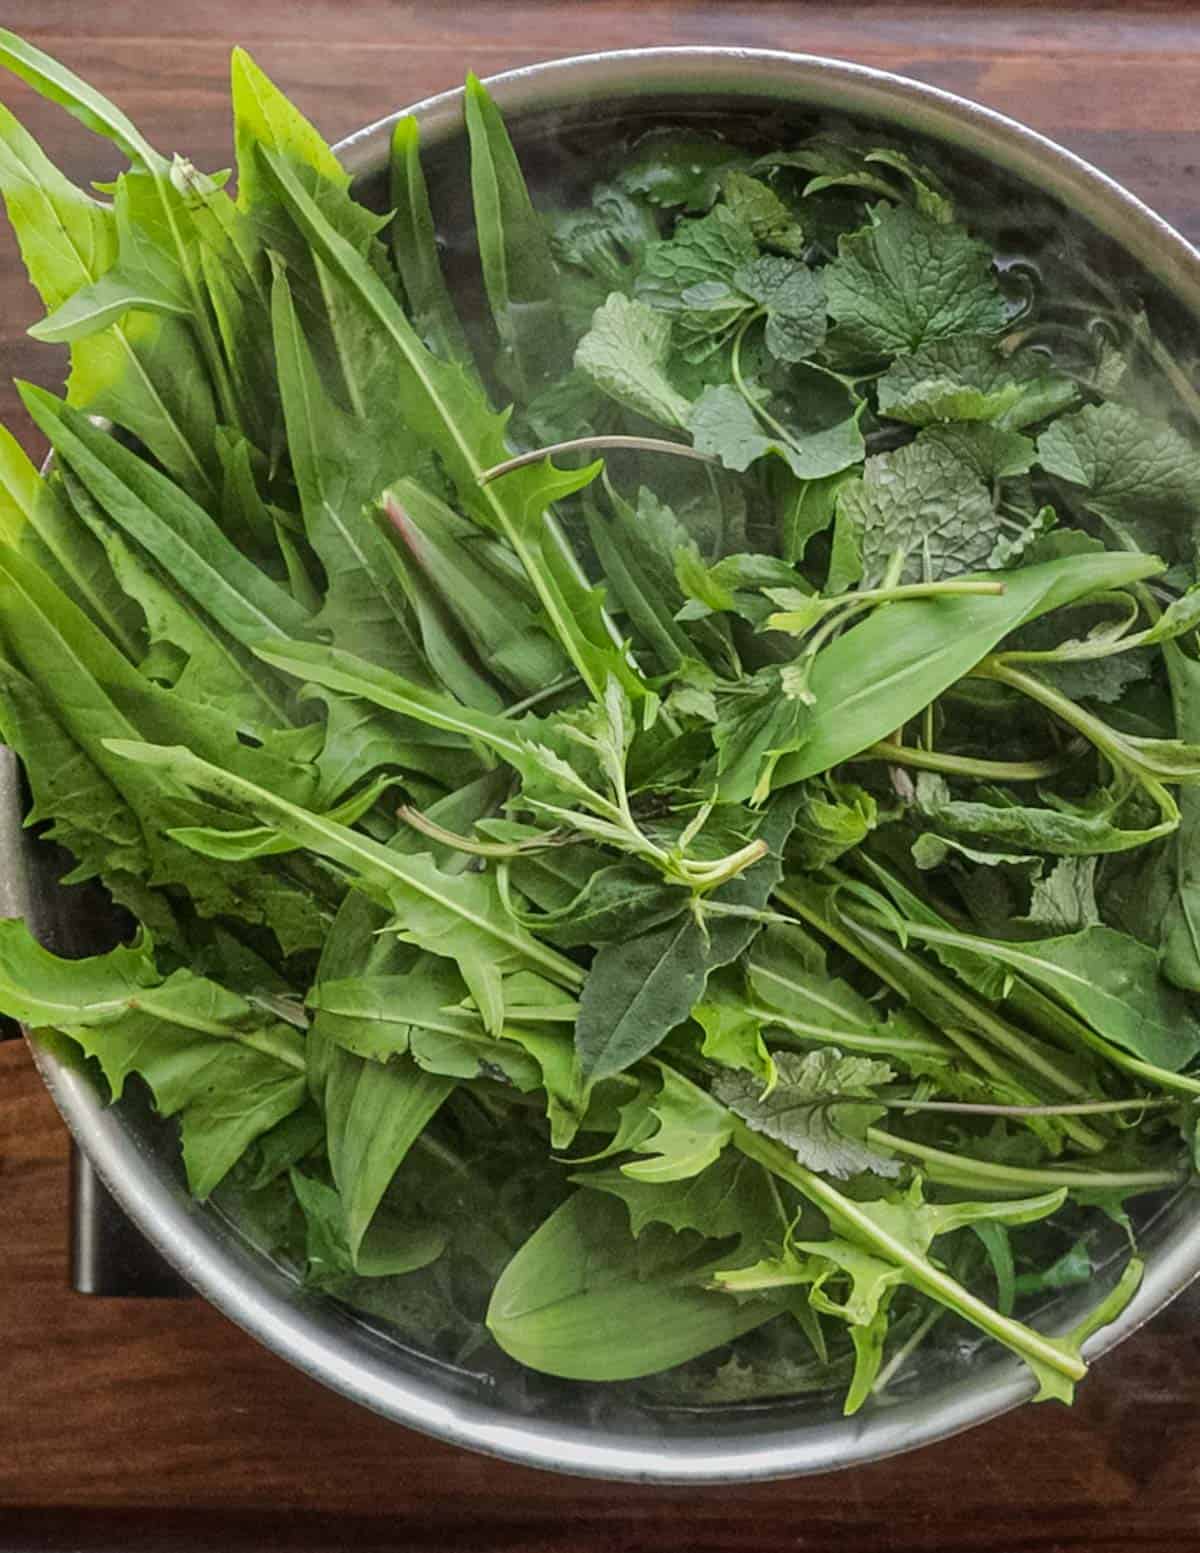 Adding dandelions and horta plants to a pot of boiling water. 